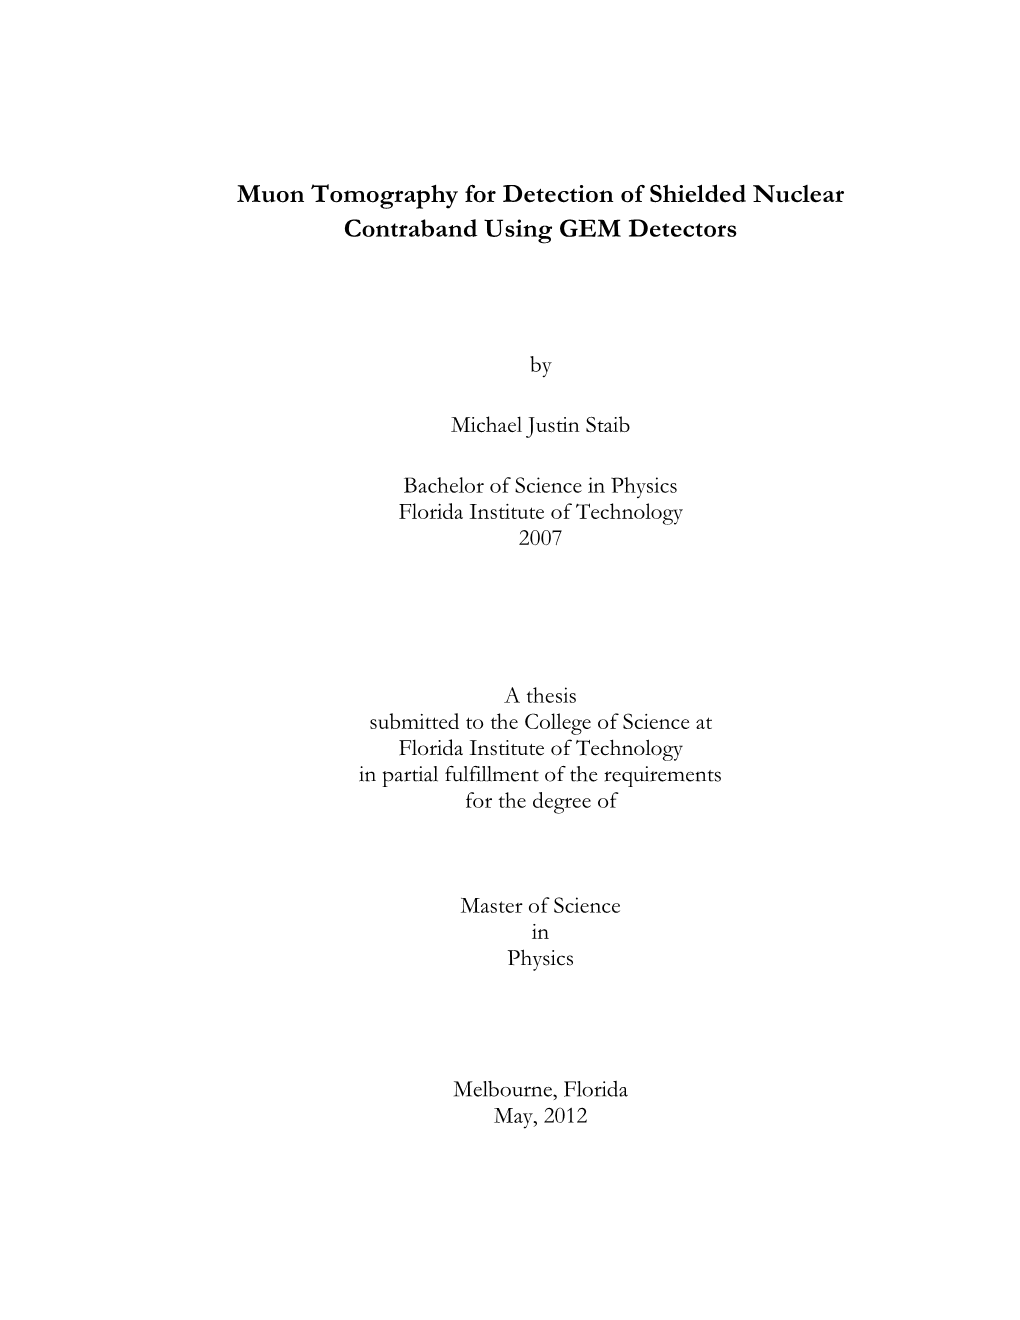 Muon Tomography for Detection of Shielded Nuclear Contraband Using GEM Detectors